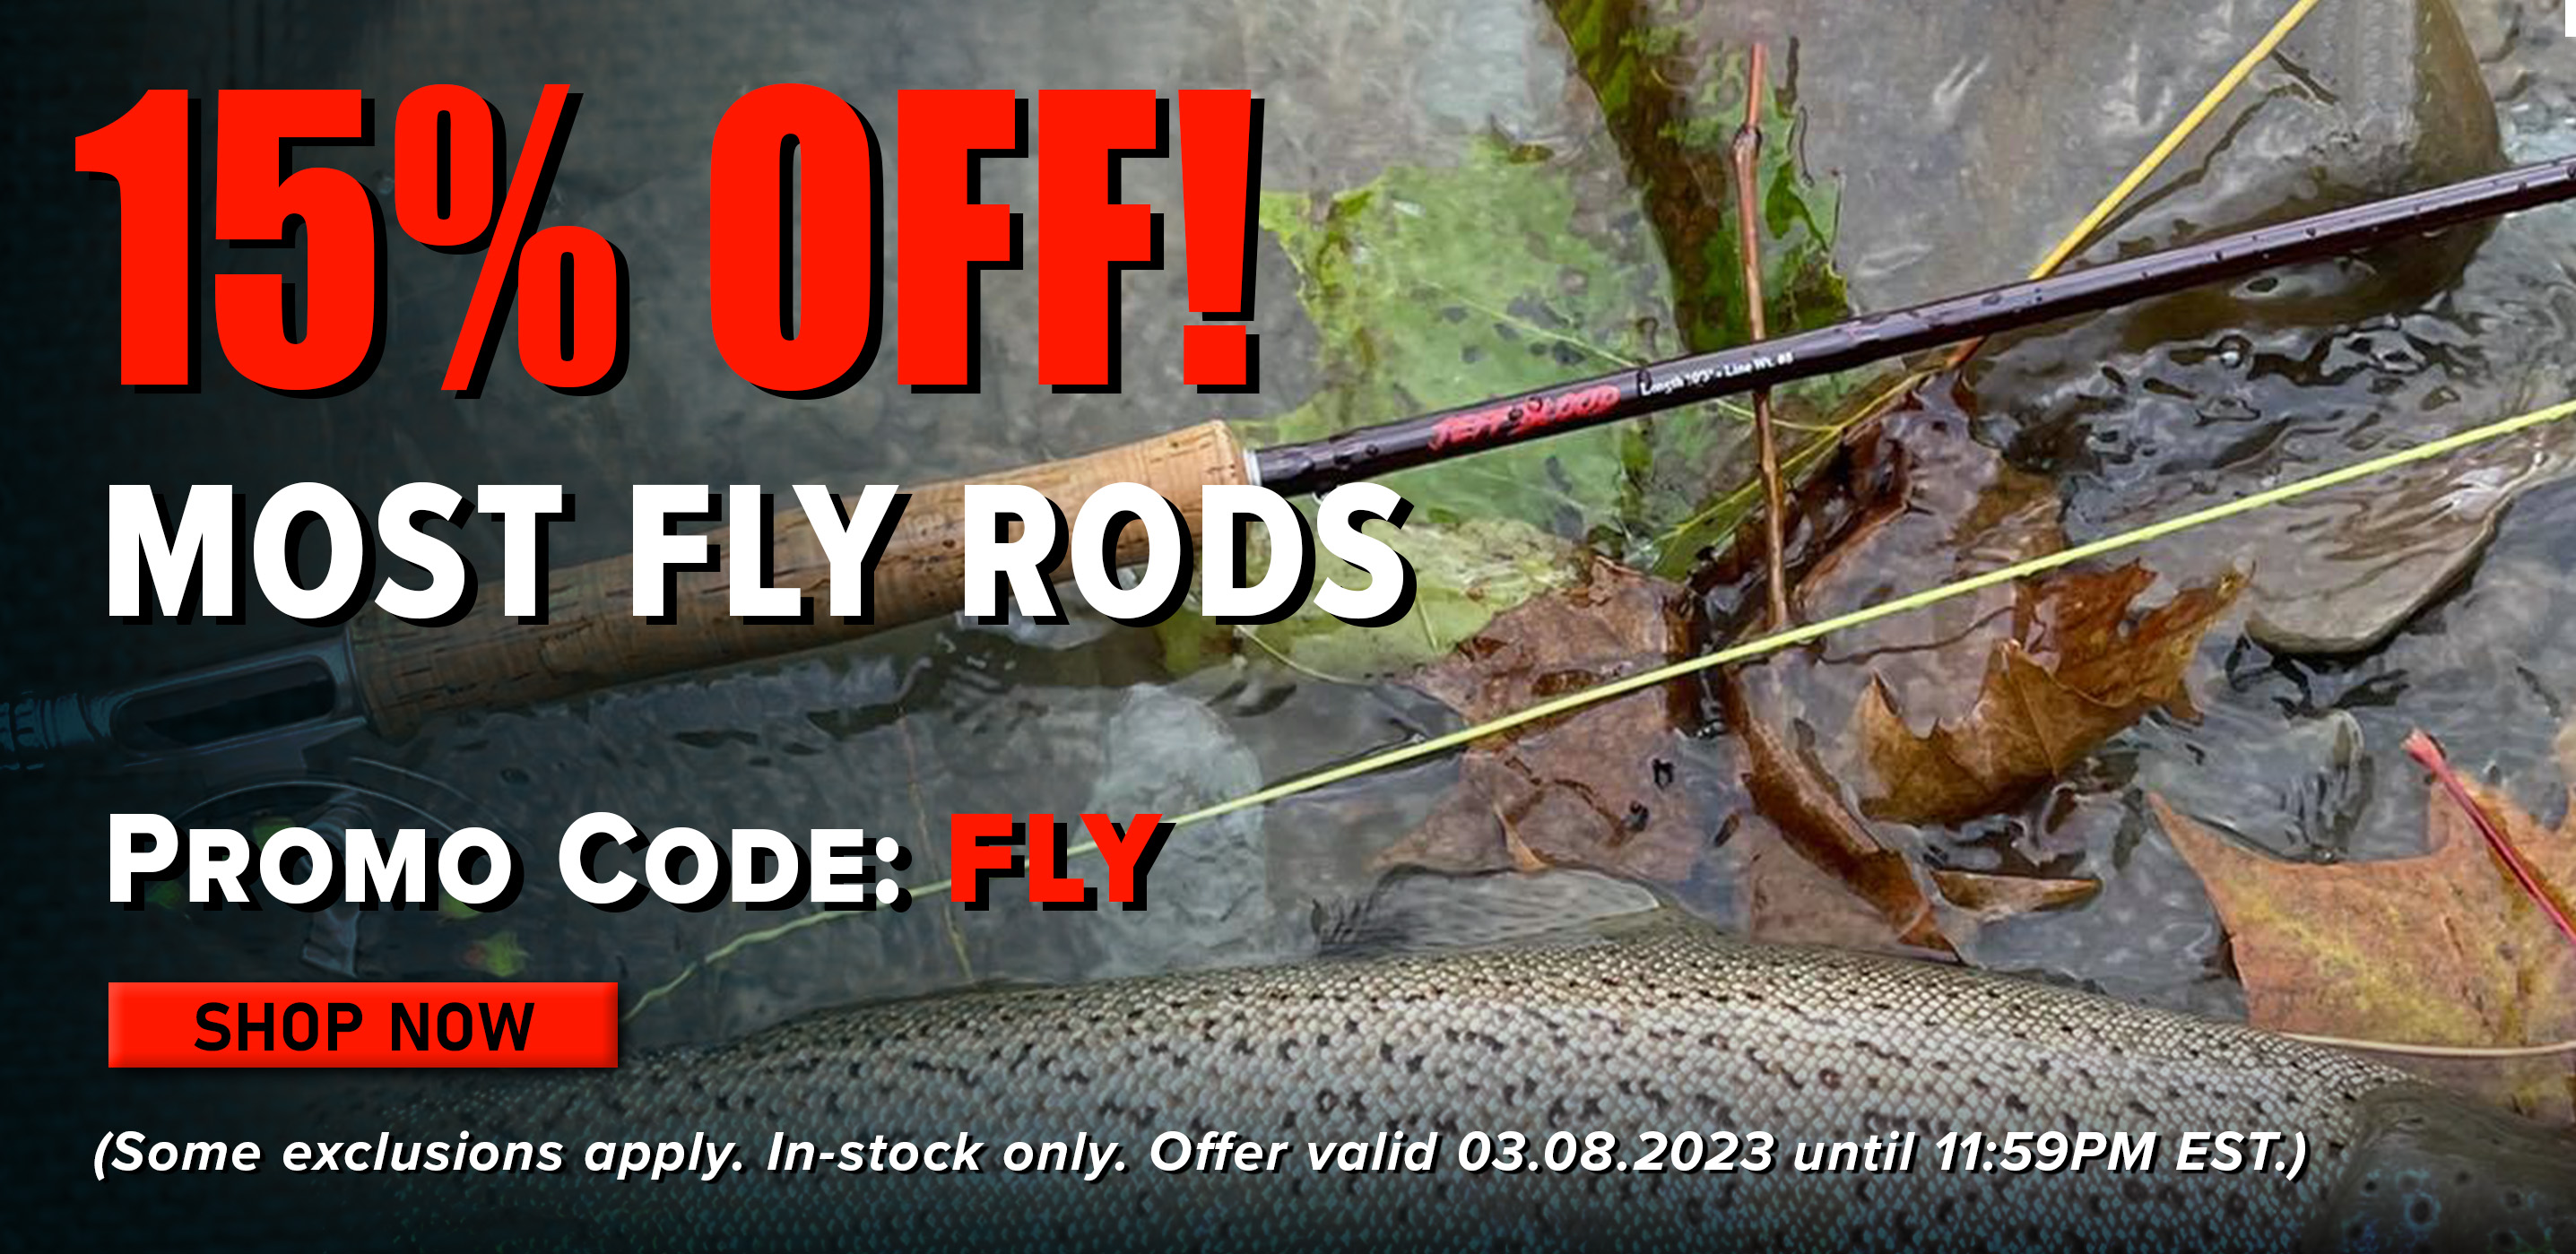 The Time for Your New (or First) Fly Rod is Now! Take 15% Off Most Fly  Rods! - Fish USA